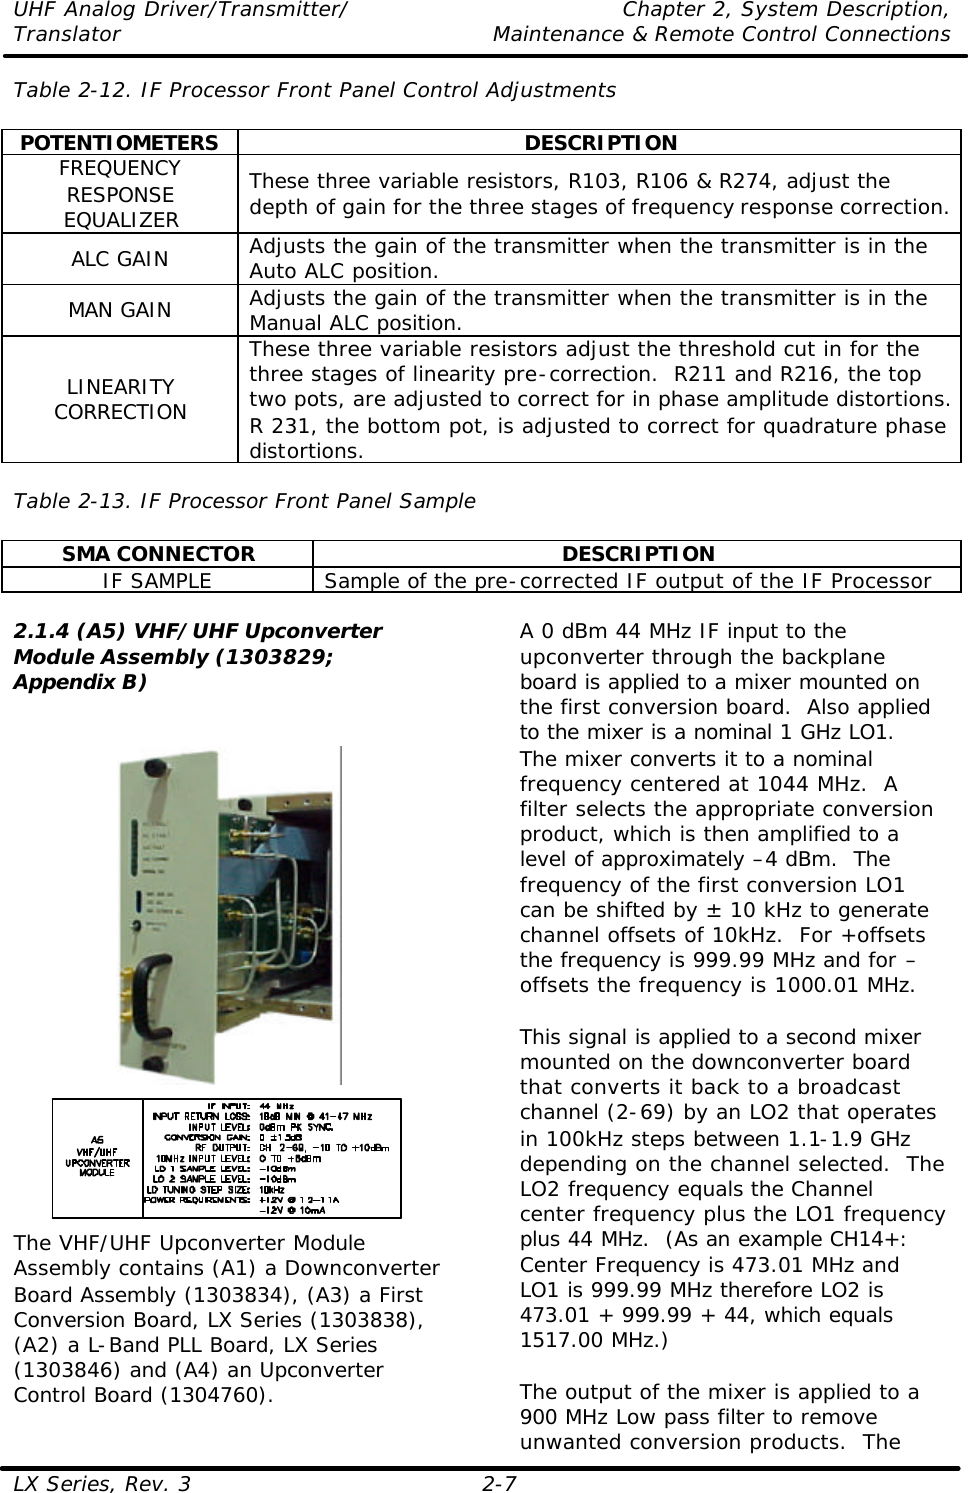 UHF Analog Driver/Transmitter/ Chapter 2, System Description, Translator Maintenance &amp; Remote Control Connections LX Series, Rev. 3 2-7  Table 2-12. IF Processor Front Panel Control Adjustments  POTENTIOMETERS DESCRIPTION FREQUENCY RESPONSE EQUALIZER These three variable resistors, R103, R106 &amp; R274, adjust the depth of gain for the three stages of frequency response correction. ALC GAIN Adjusts the gain of the transmitter when the transmitter is in the Auto ALC position. MAN GAIN Adjusts the gain of the transmitter when the transmitter is in the Manual ALC position. LINEARITY CORRECTION These three variable resistors adjust the threshold cut in for the three stages of linearity pre-correction.  R211 and R216, the top two pots, are adjusted to correct for in phase amplitude distortions.  R 231, the bottom pot, is adjusted to correct for quadrature phase distortions.  Table 2-13. IF Processor Front Panel Sample  SMA CONNECTOR DESCRIPTION IF SAMPLE Sample of the pre-corrected IF output of the IF Processor  2.1.4 (A5) VHF/UHF Upconverter Module Assembly (1303829; Appendix B)     The VHF/UHF Upconverter Module Assembly contains (A1) a Downconverter Board Assembly (1303834), (A3) a First Conversion Board, LX Series (1303838), (A2) a L-Band PLL Board, LX Series (1303846) and (A4) an Upconverter Control Board (1304760).  A 0 dBm 44 MHz IF input to the upconverter through the backplane board is applied to a mixer mounted on the first conversion board.  Also applied to the mixer is a nominal 1 GHz LO1.  The mixer converts it to a nominal frequency centered at 1044 MHz.  A filter selects the appropriate conversion product, which is then amplified to a level of approximately –4 dBm.  The frequency of the first conversion LO1 can be shifted by ± 10 kHz to generate channel offsets of 10kHz.  For +offsets the frequency is 999.99 MHz and for –offsets the frequency is 1000.01 MHz.  This signal is applied to a second mixer mounted on the downconverter board that converts it back to a broadcast channel (2-69) by an LO2 that operates in 100kHz steps between 1.1-1.9 GHz depending on the channel selected.  The LO2 frequency equals the Channel center frequency plus the LO1 frequency plus 44 MHz.  (As an example CH14+: Center Frequency is 473.01 MHz and LO1 is 999.99 MHz therefore LO2 is 473.01 + 999.99 + 44, which equals 1517.00 MHz.)  The output of the mixer is applied to a 900 MHz Low pass filter to remove unwanted conversion products.  The 